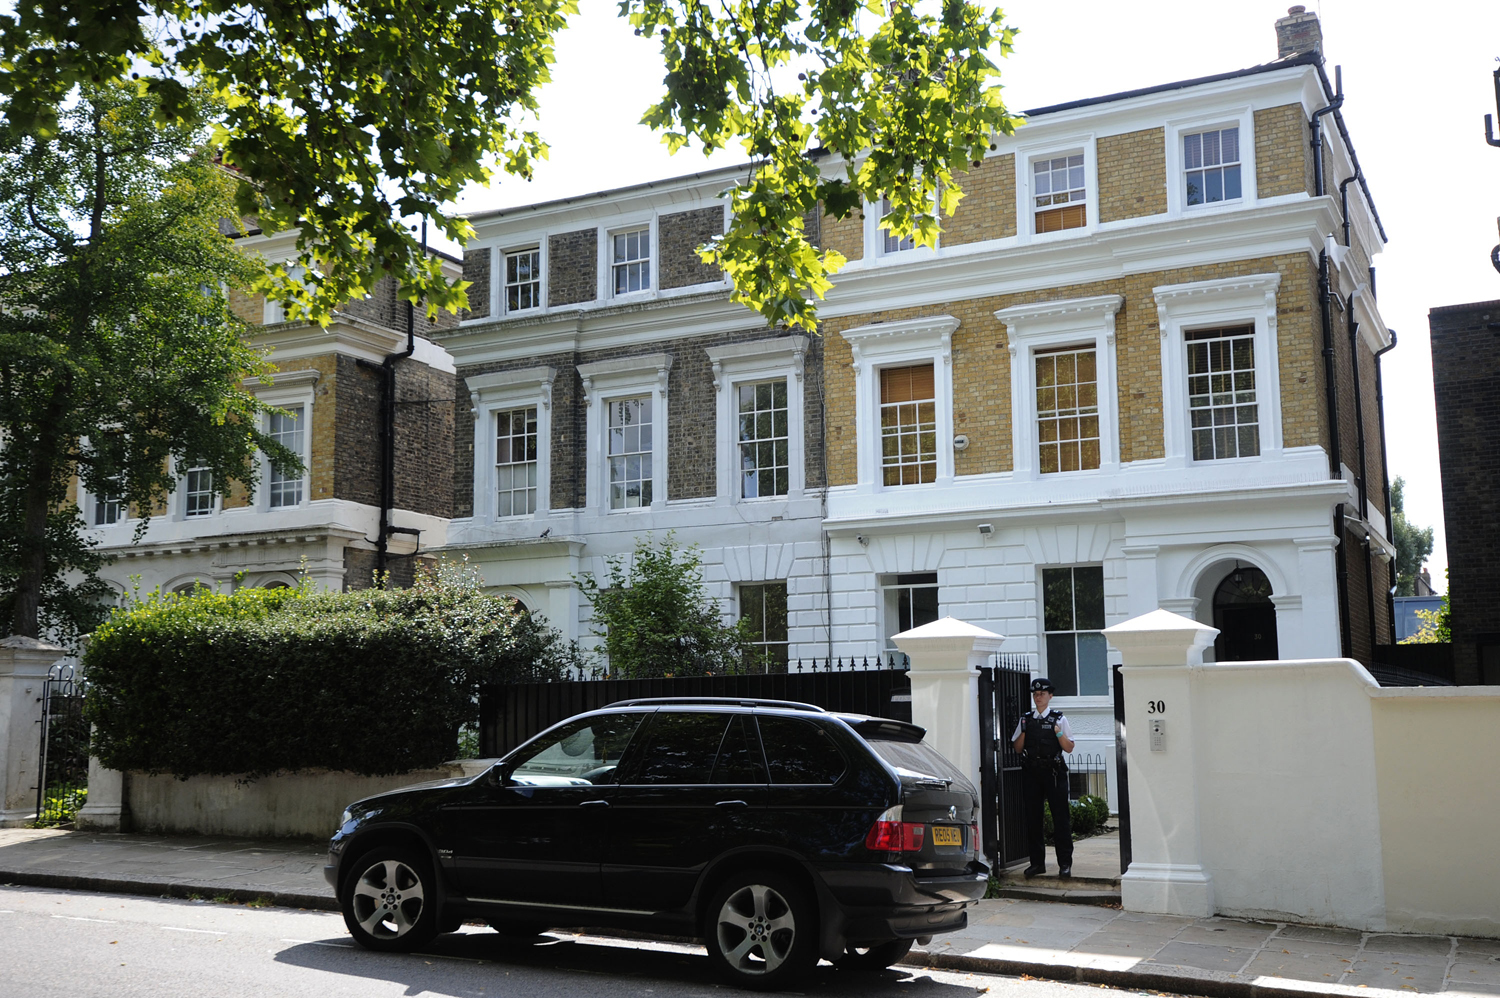 Amy Winehouse S London Home Sells For 3 2 Million